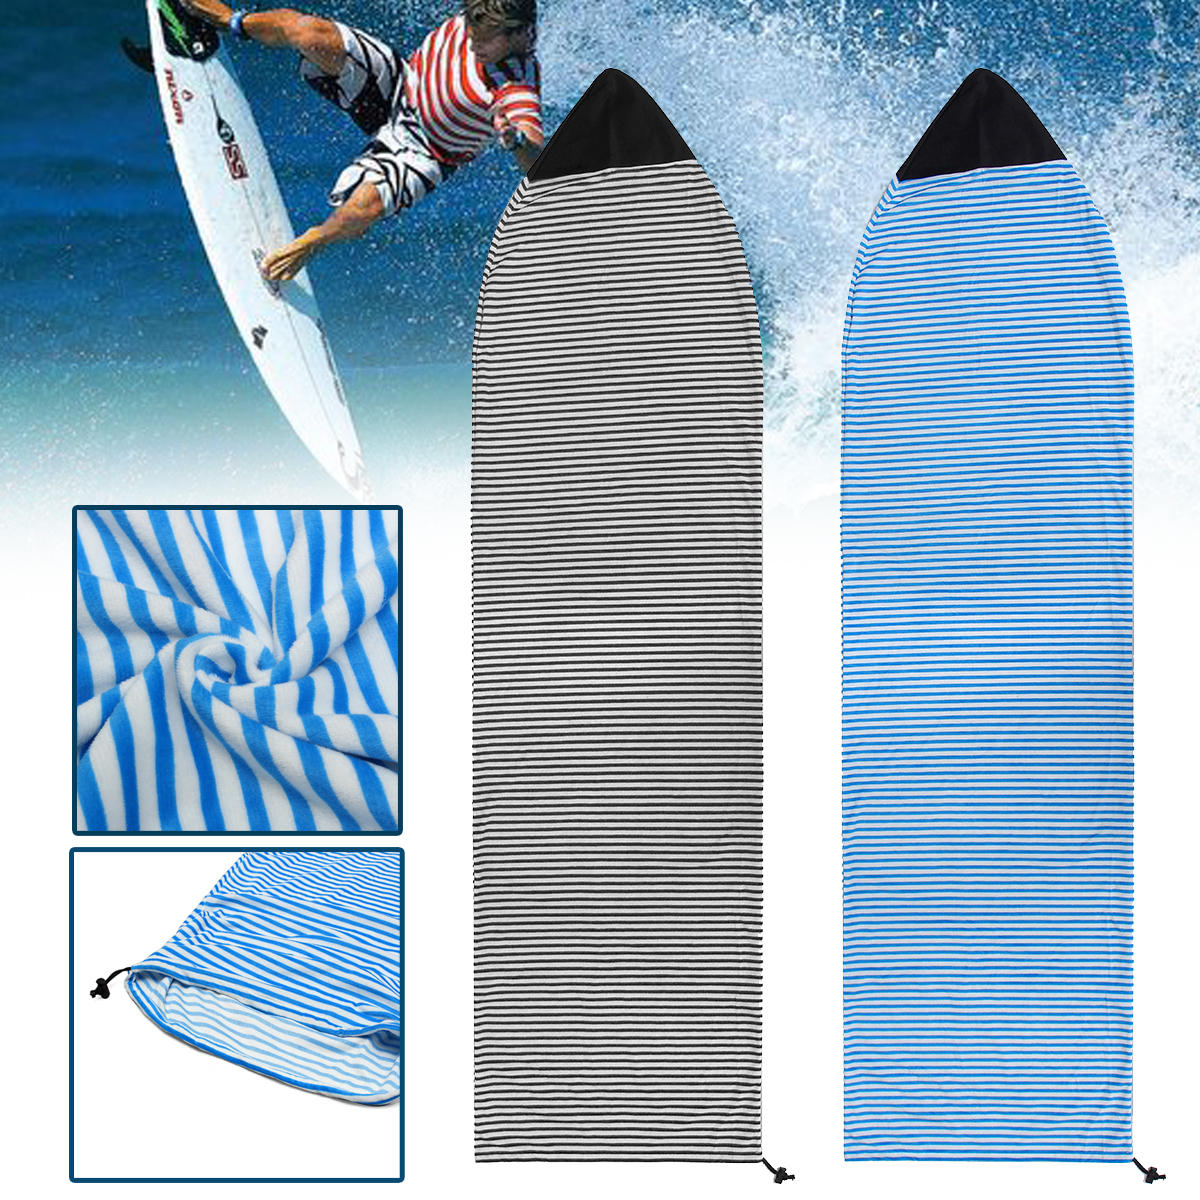 6 / 6.3 / 6.6 / 7inch Surfboard Portector Ultraligh Elestic Force Cover Surboard Bag